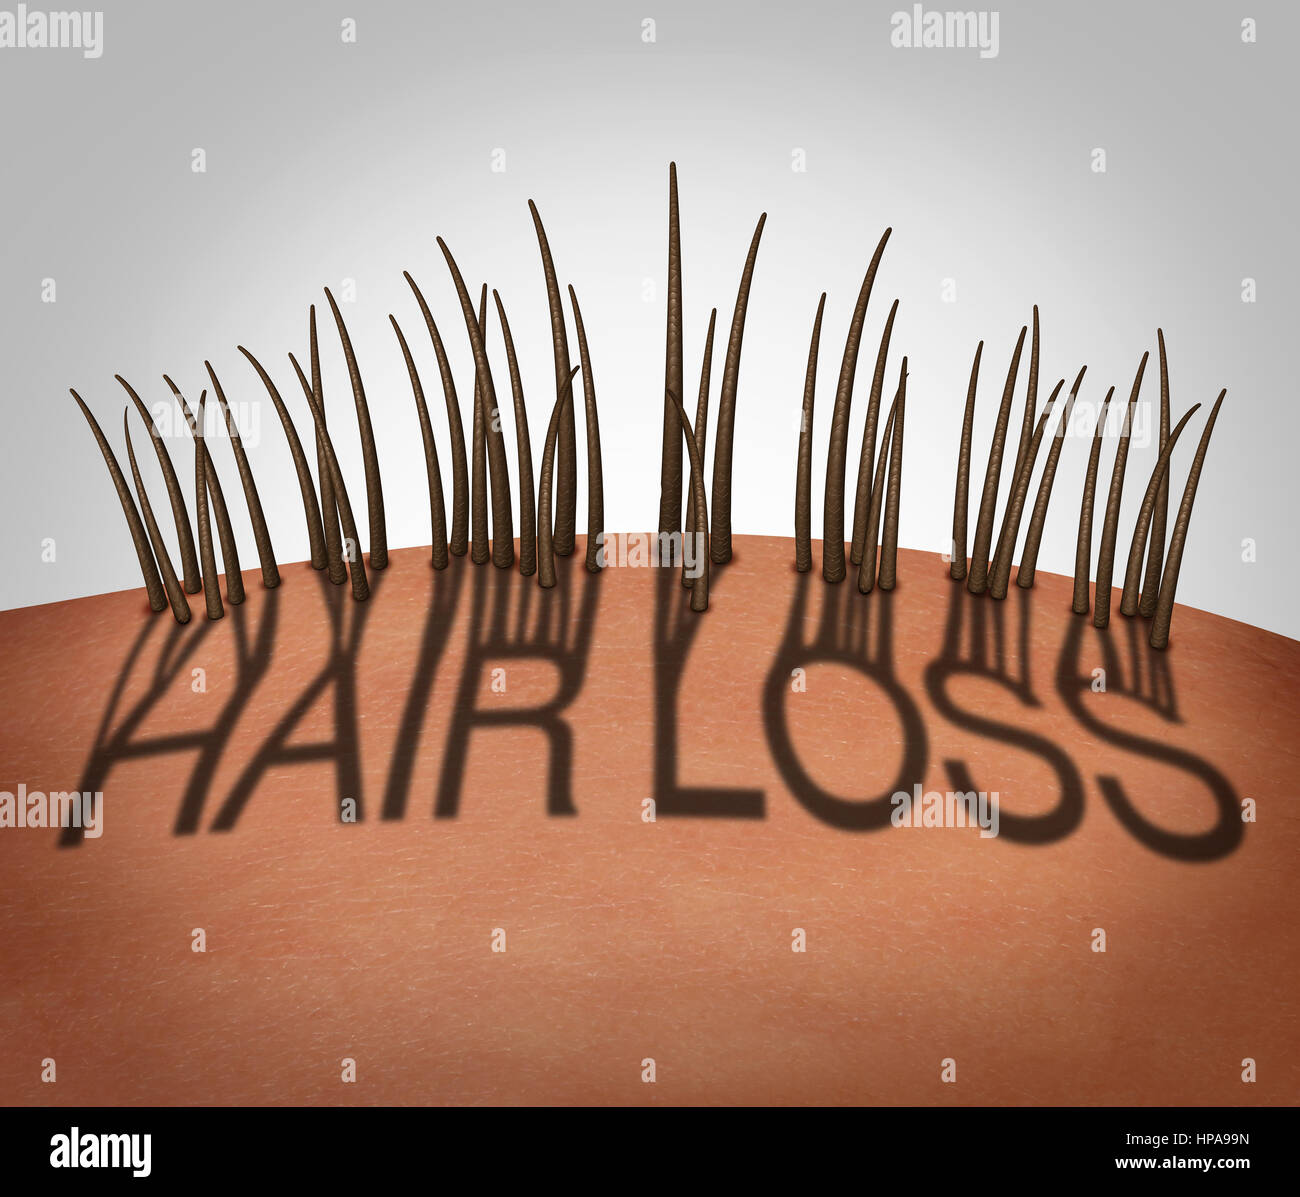 Hair loss and balding medical concept as a receding hairline with text as a shadow with thinning follicles on a mostly bald head. Stock Photo